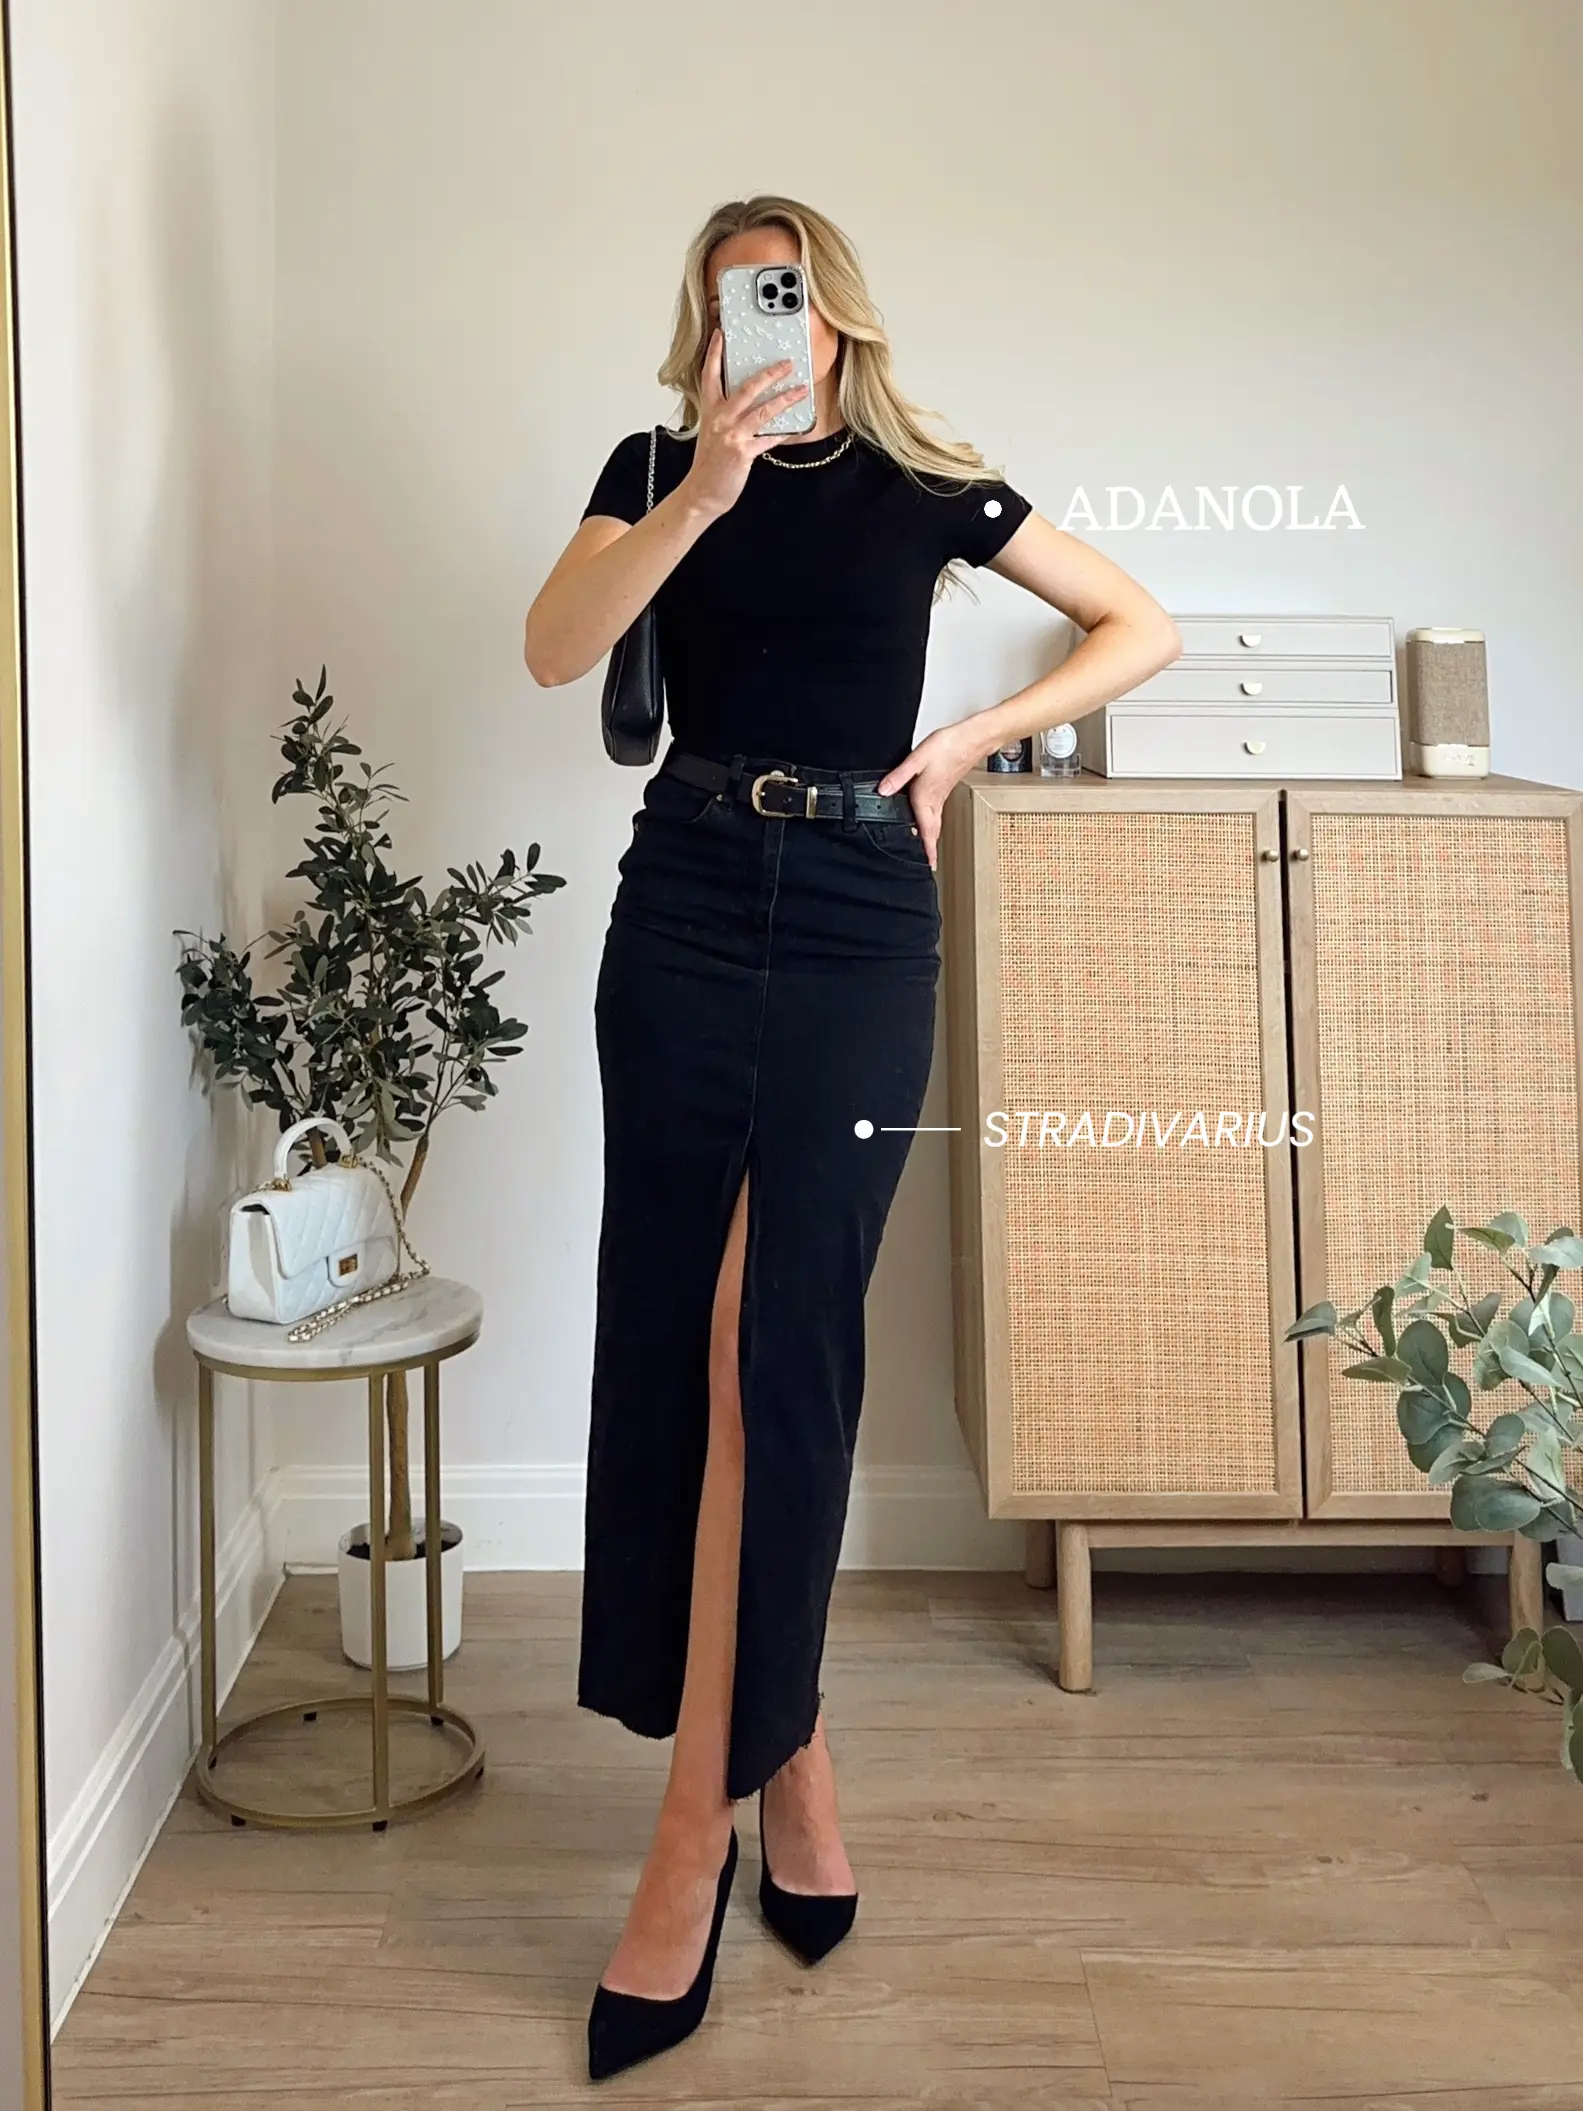 Morgan Bullard on Instagram: Found *the* comfiest  pants that look &  feel nearly identical to the wide-leg lululemon align pants. 😍🫶🏼 &  they're $100 less than the real deal! 🤩 